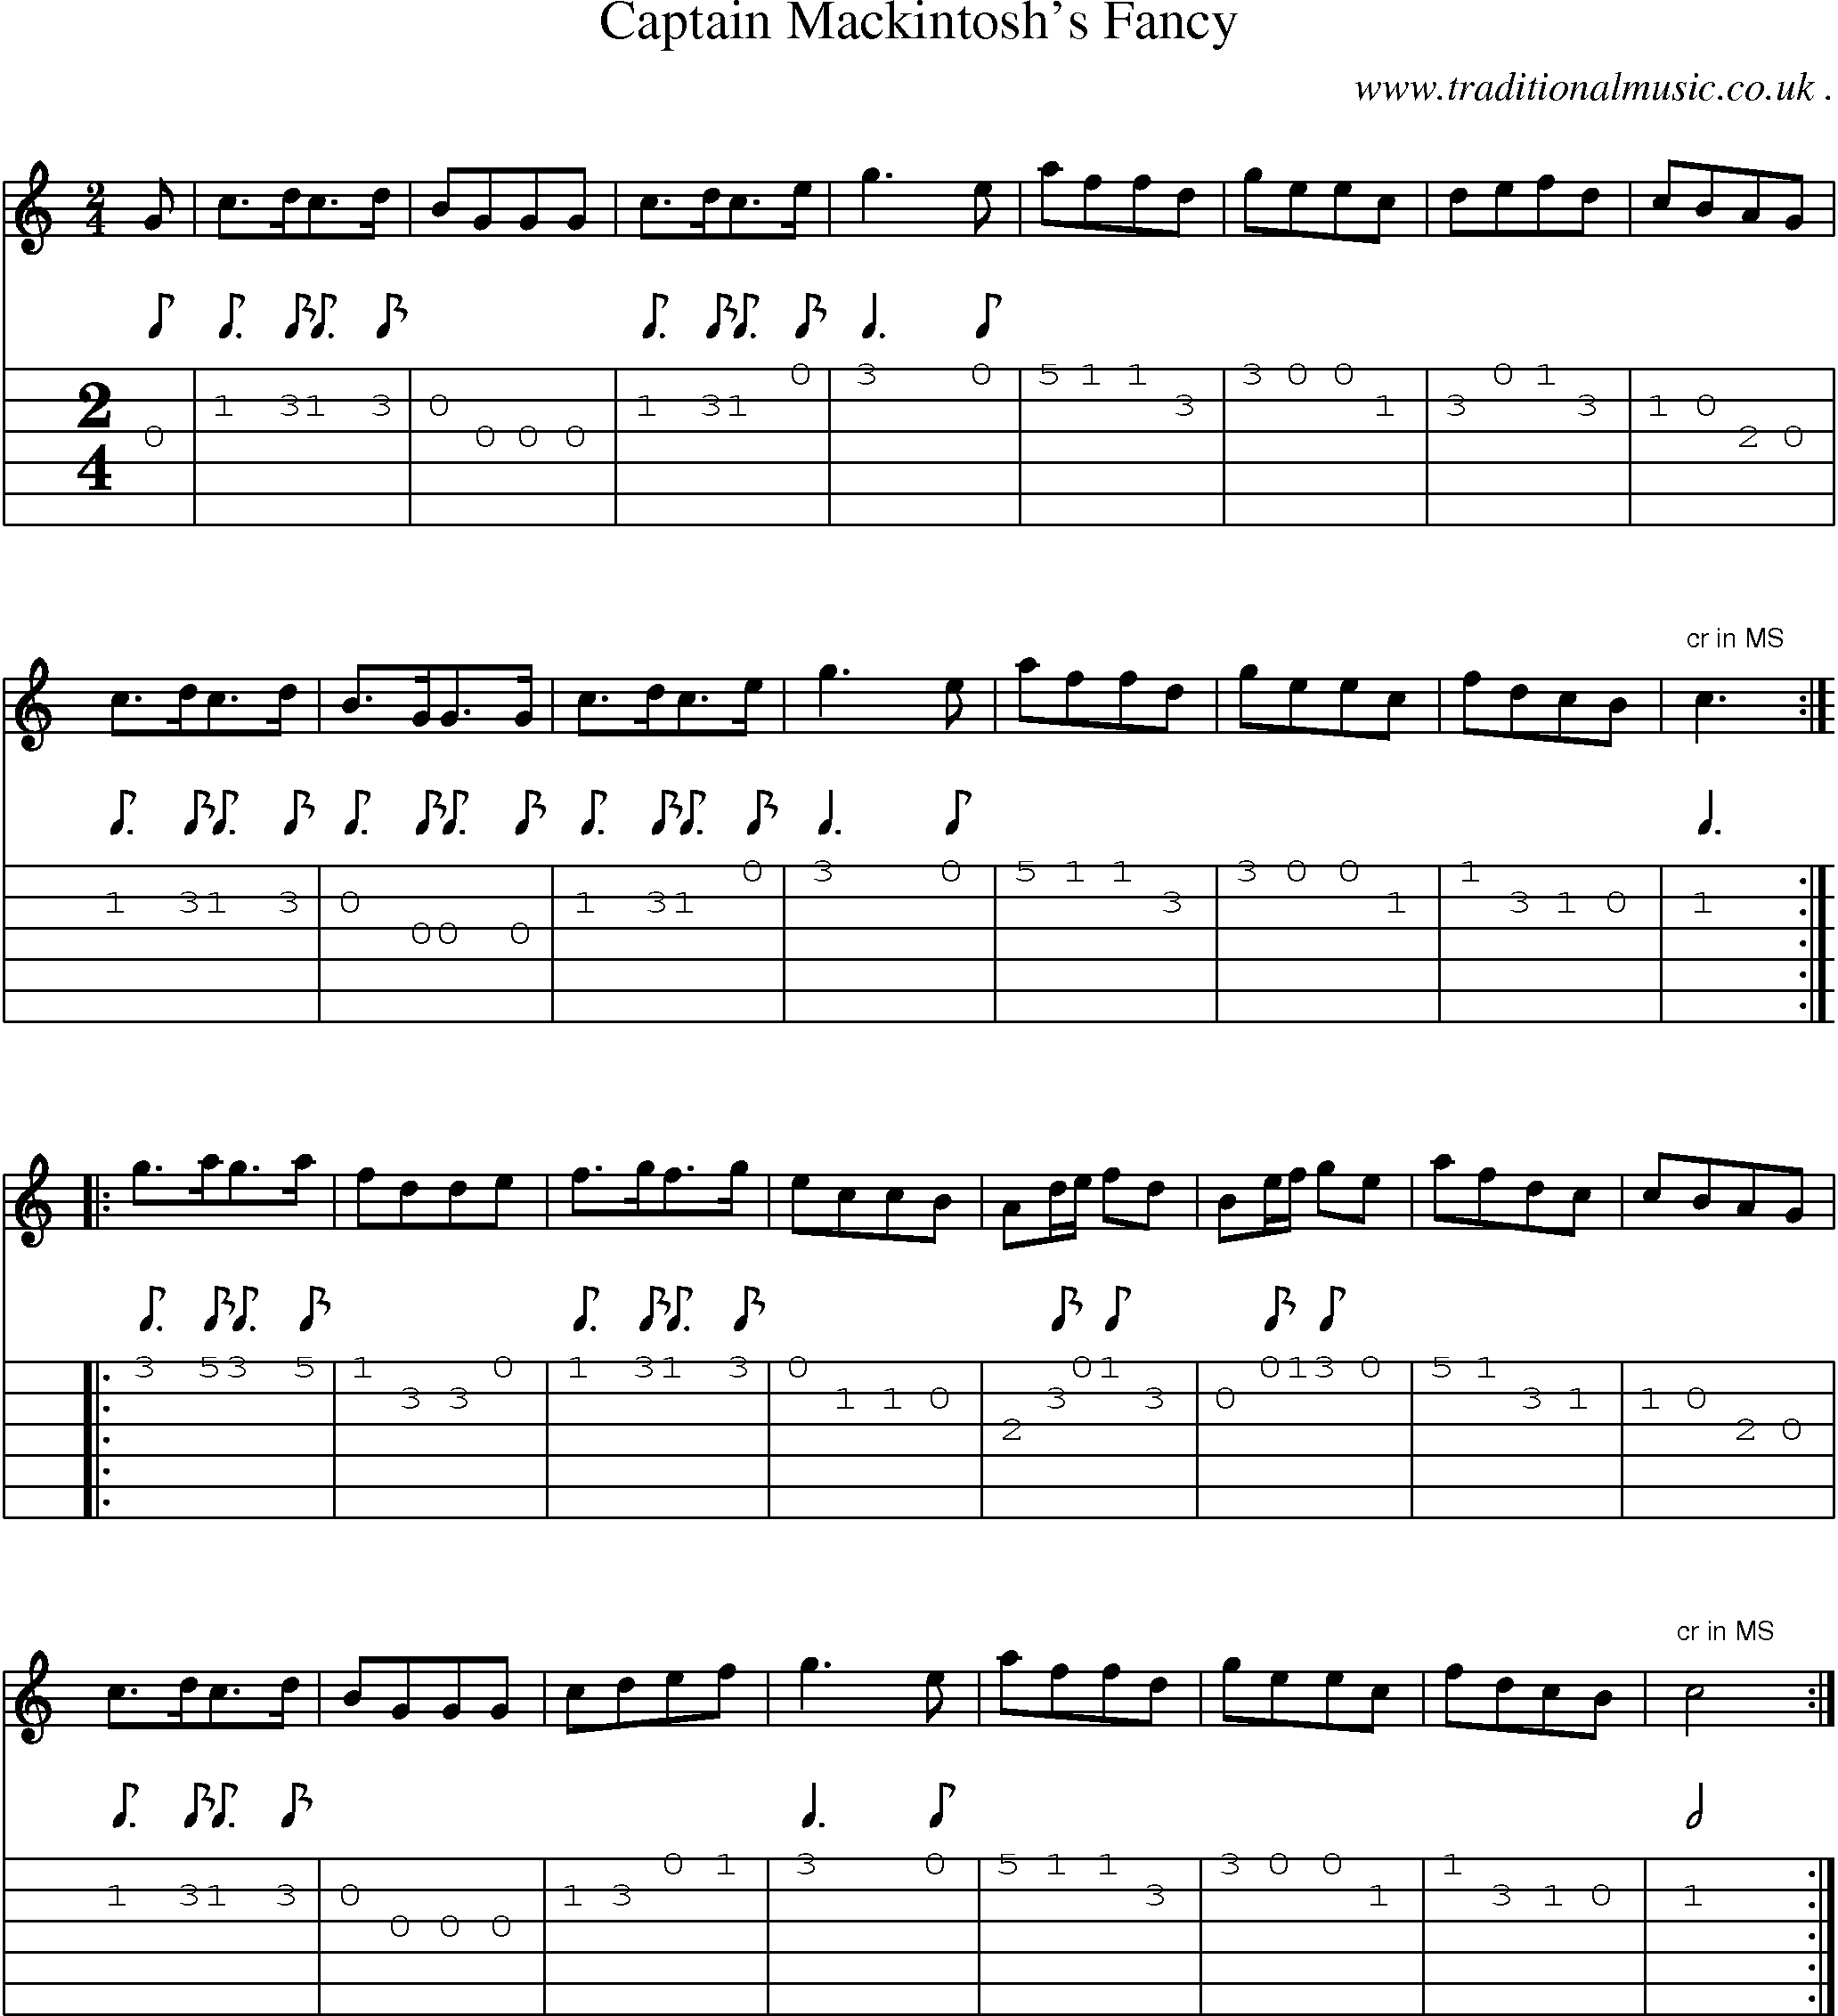 Sheet-Music and Guitar Tabs for Captain Mackintoshs Fancy